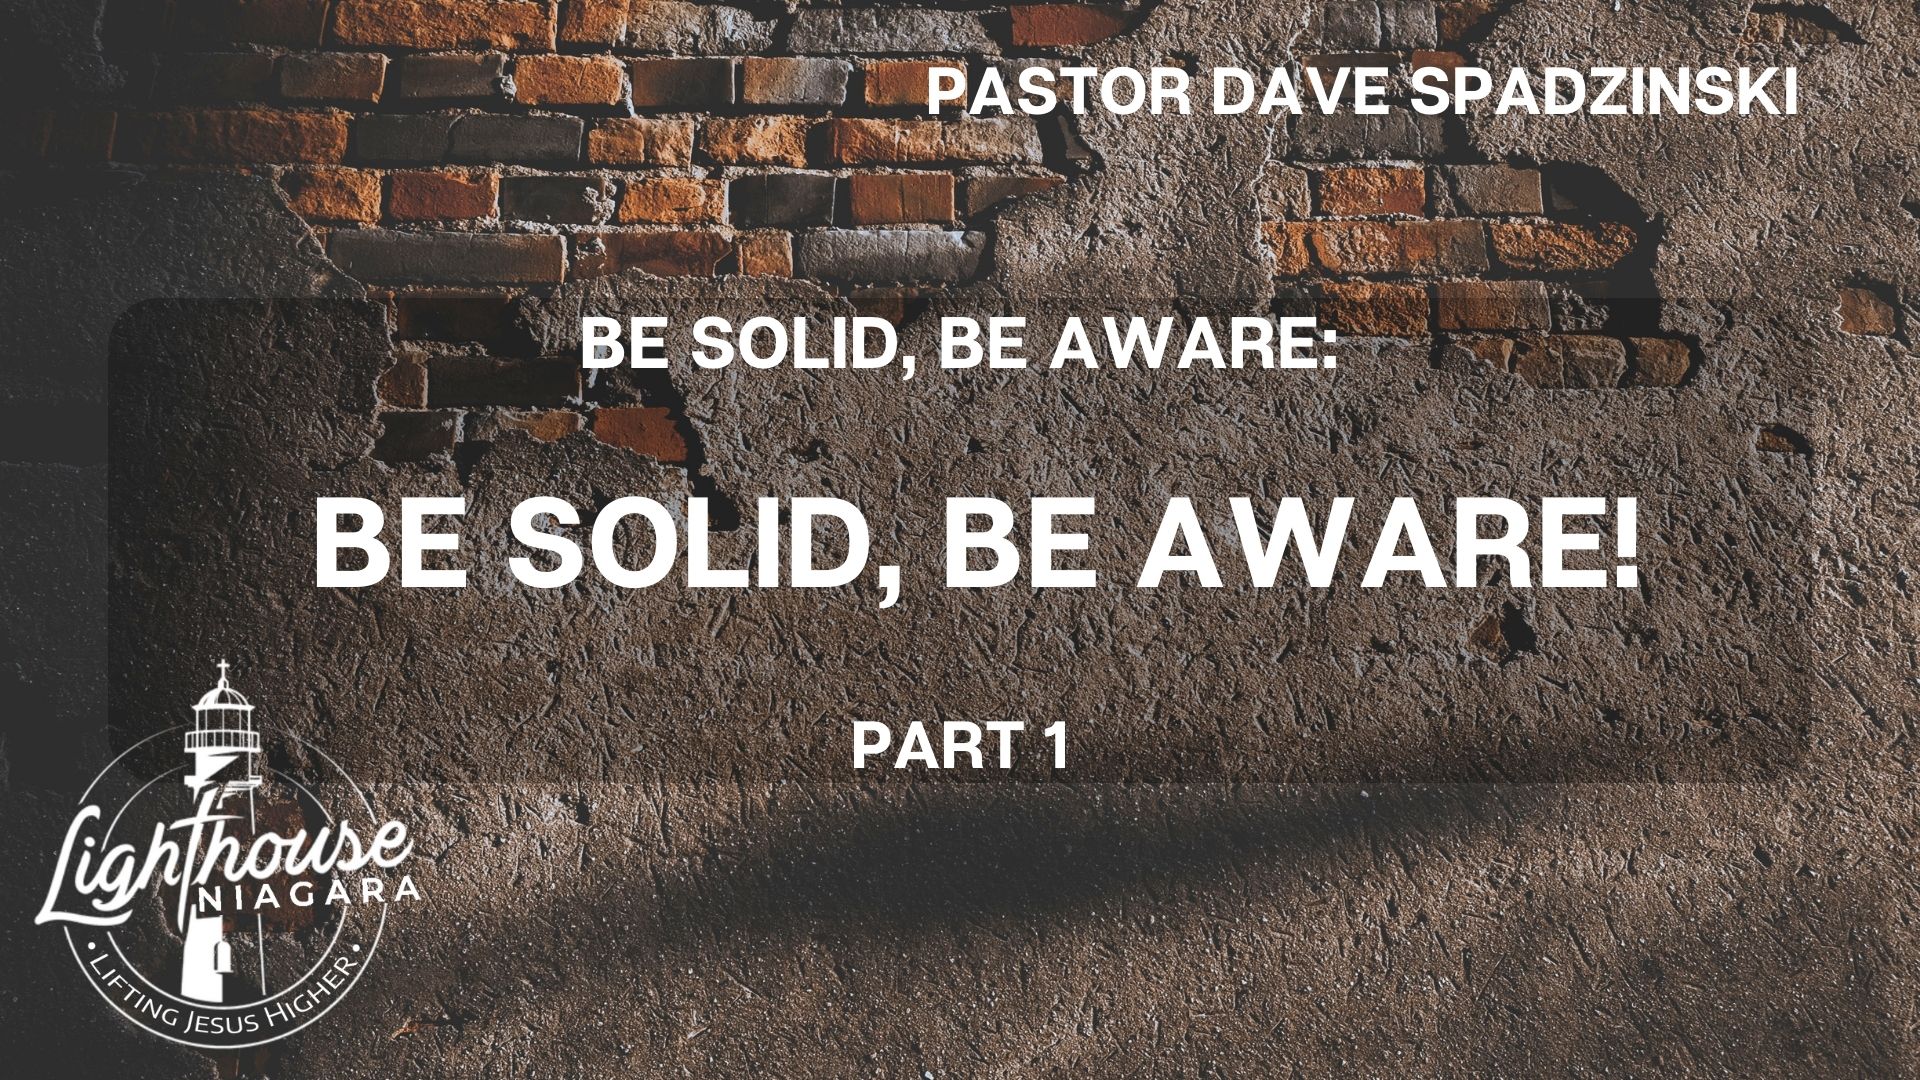 Be Solid, Be Aware: Be Solid, Be Aware! - Pastor Dave Spadzinski